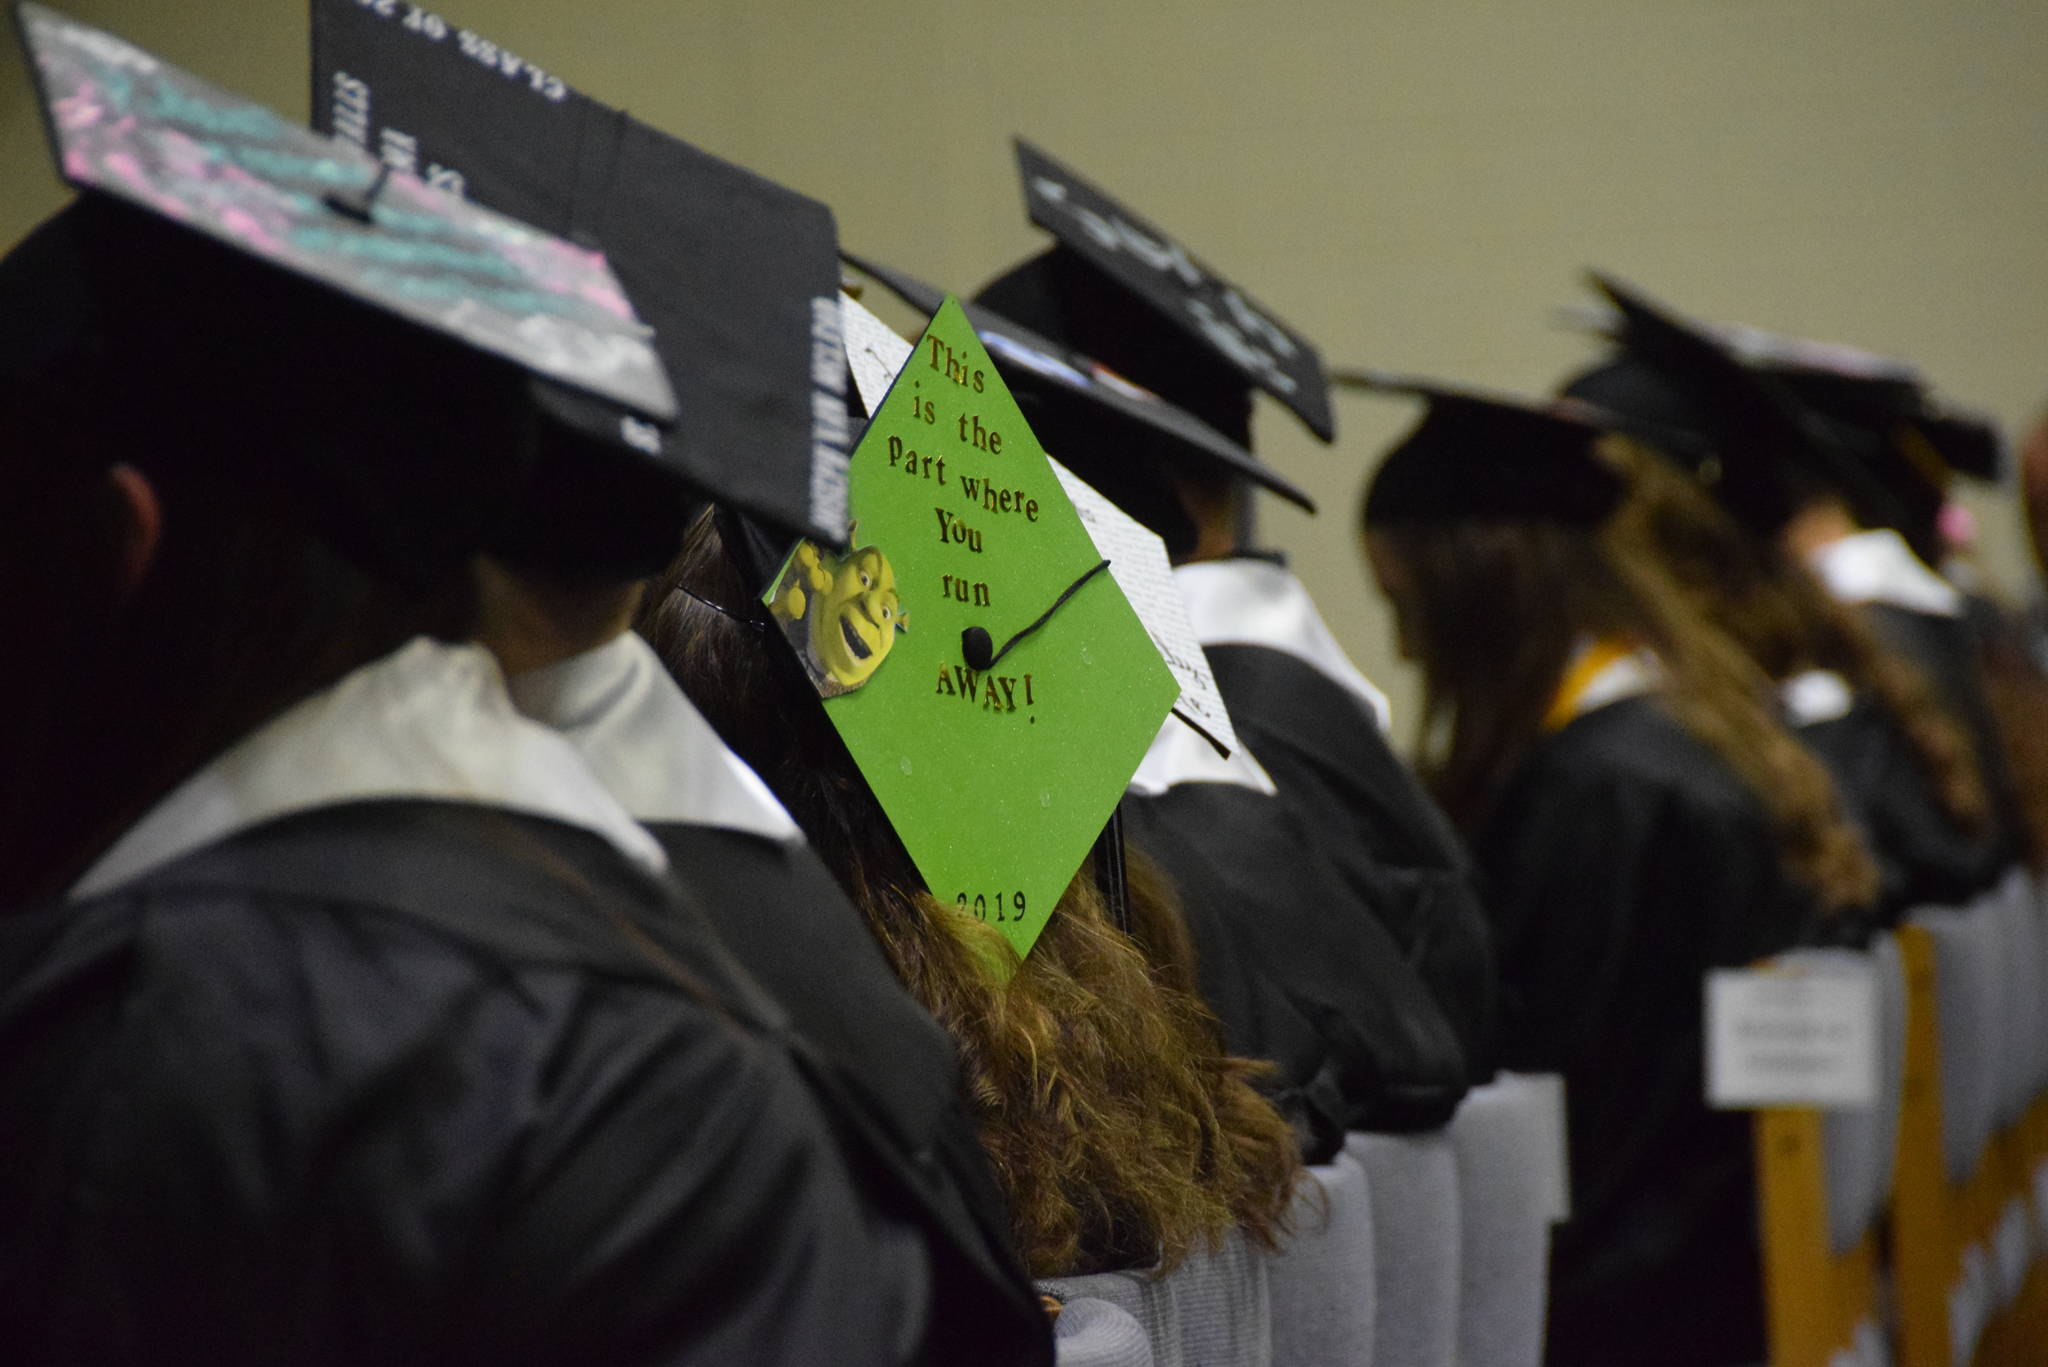 One of the graduates’ decorated caps is seen here during the 2019 Nikiski High School graduation in Nikiski, Alaska on May 20, 2019. (Photo by Brian Mazurek/Peninsula Clarion)